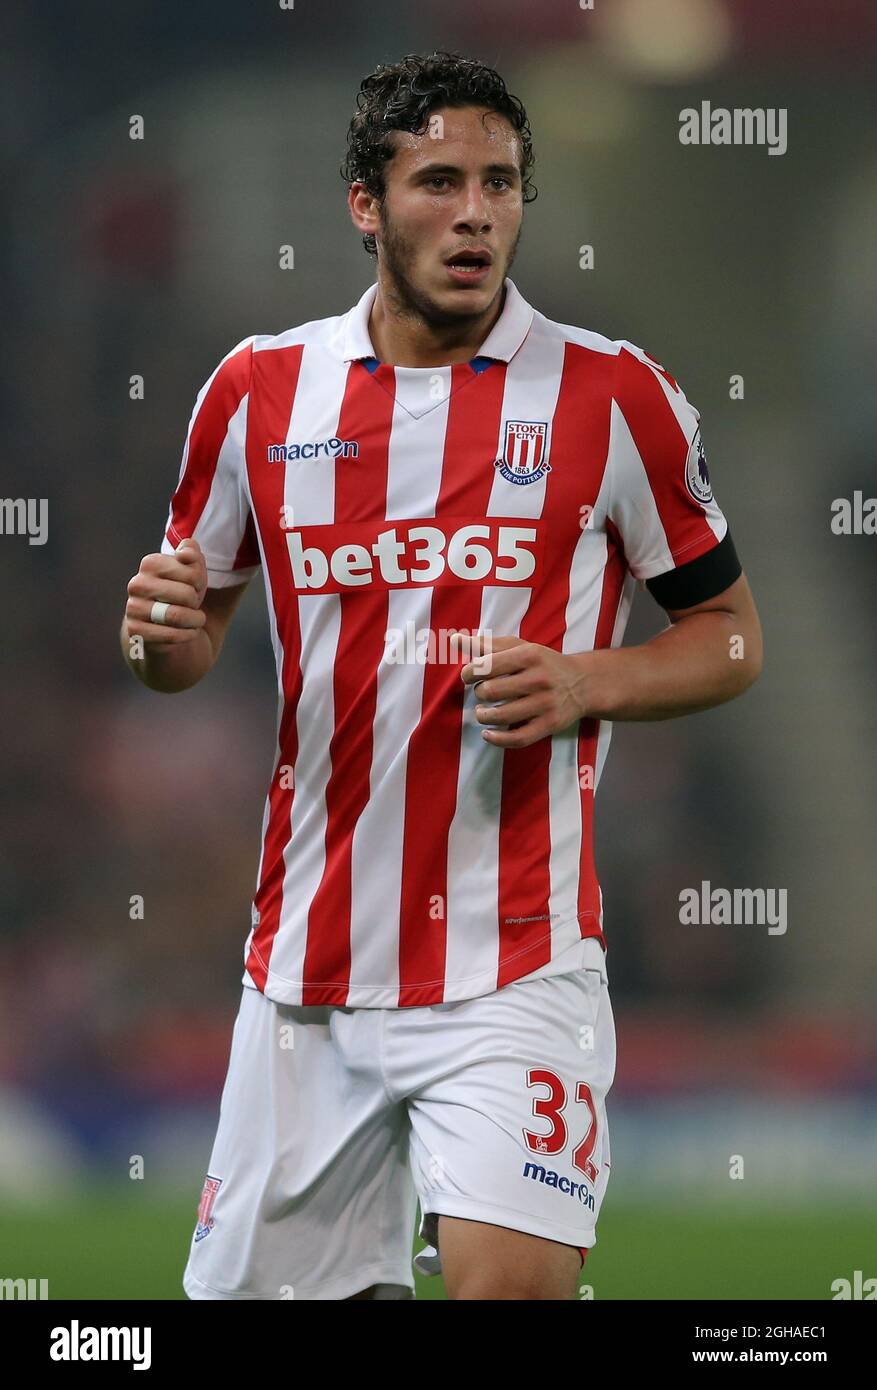 Ramadan Sobhi of Stoke City during the Premier League match at the Britannia Stadium, Stoke on Trent. Picture date: October 31st, 2016. Pic Simon Bellis/Sportimage via PA Images Stock Photo